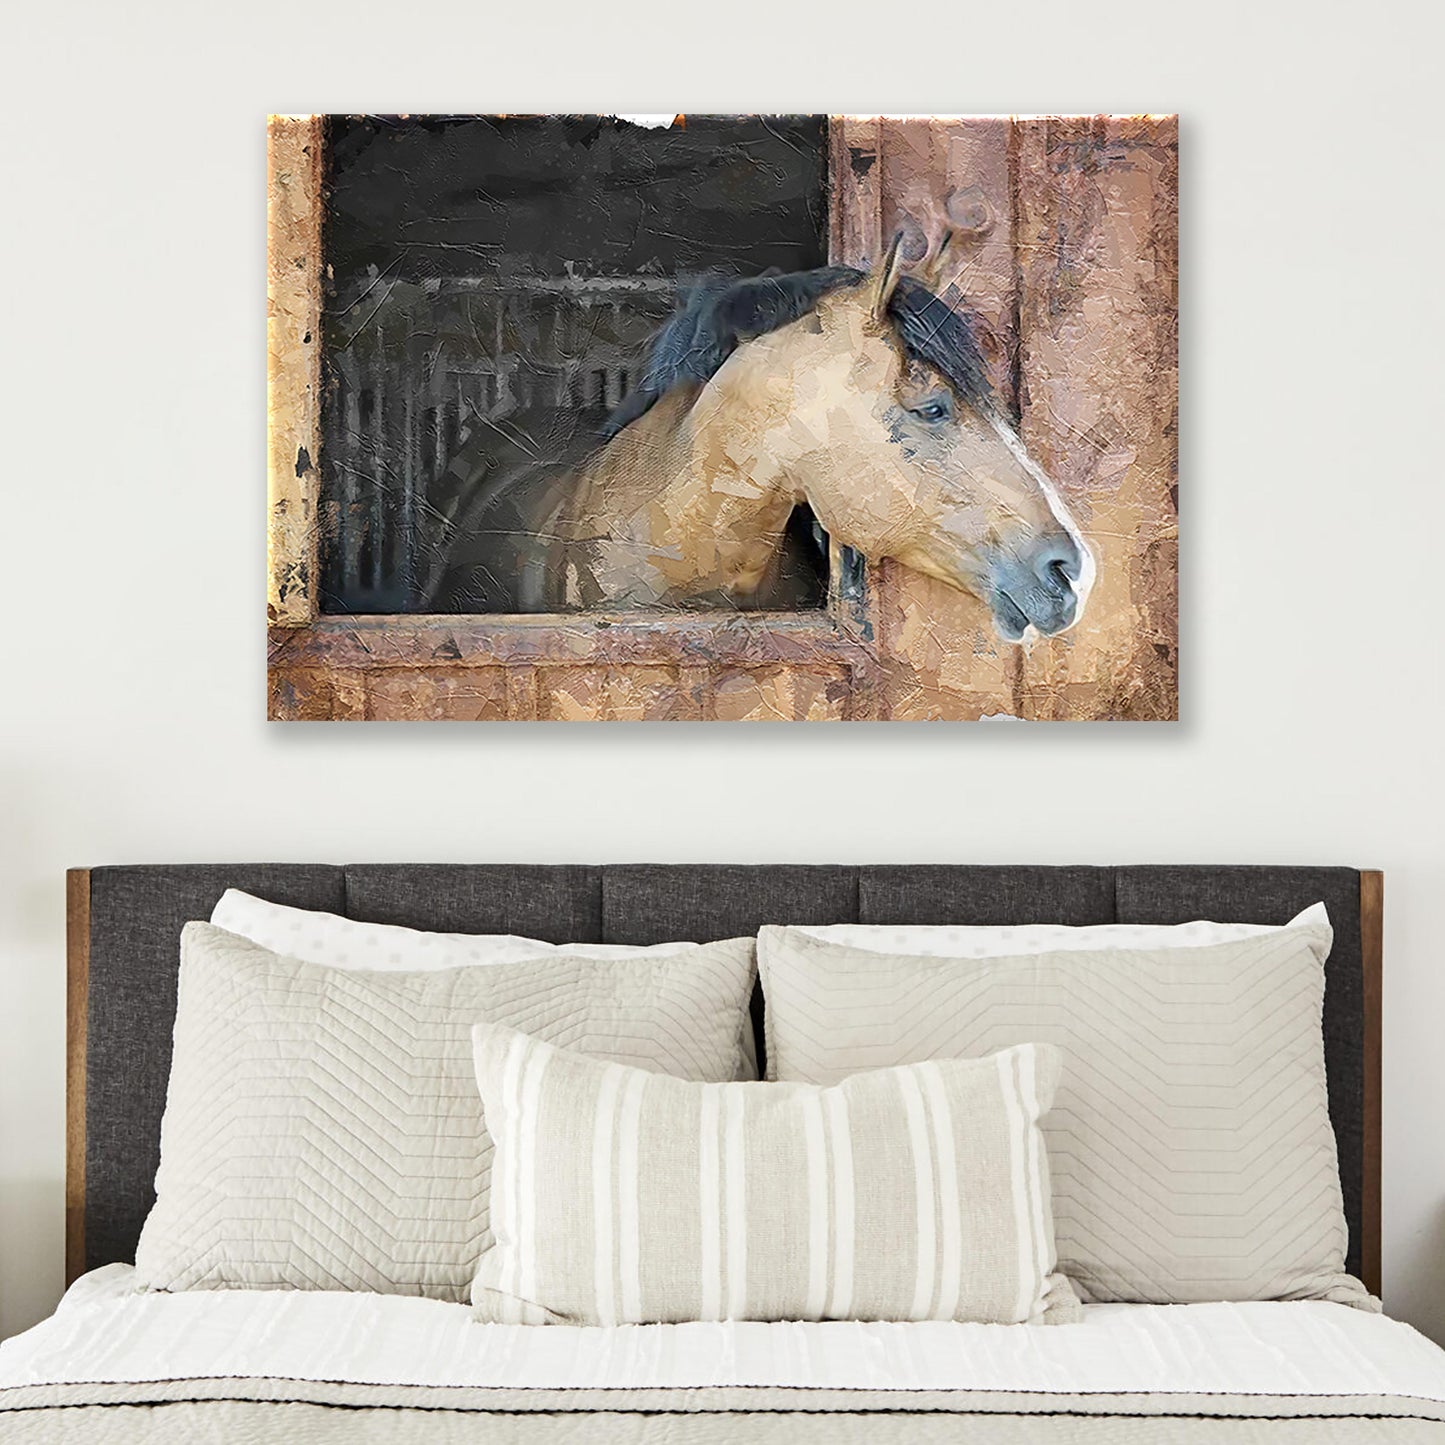 Renaissance Style Horse On A Stable Canvas Wall Art Style 2 - Image by Tailored Canvases